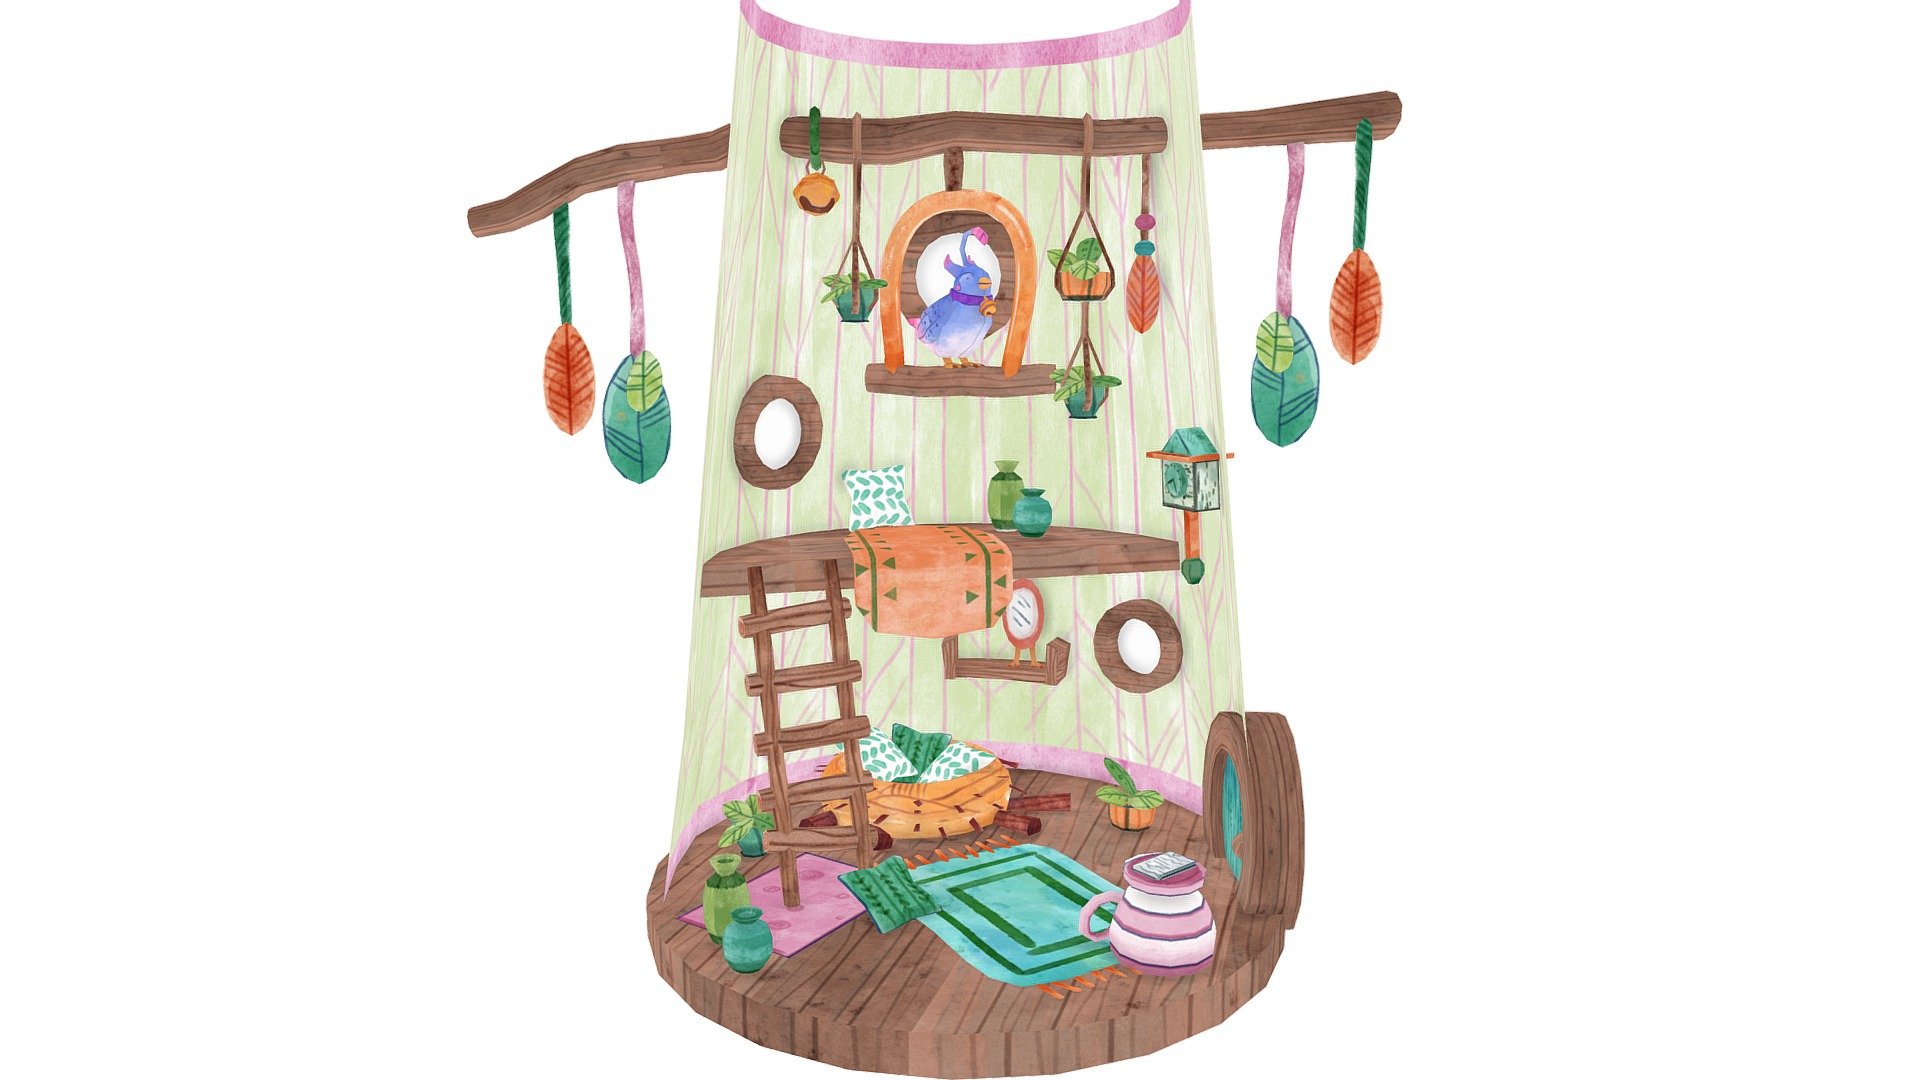 This is another location for our university game! For this, I had to concept a room where the little bird created by [@schraki ]https://sketchfab.com/schrahki) lives! This is all a construct of the birds fantasy, who in reality lives inside a small and dull cage. 
The design is inspired by bird cages and a mix of interior designs of humanoid houses 3d model